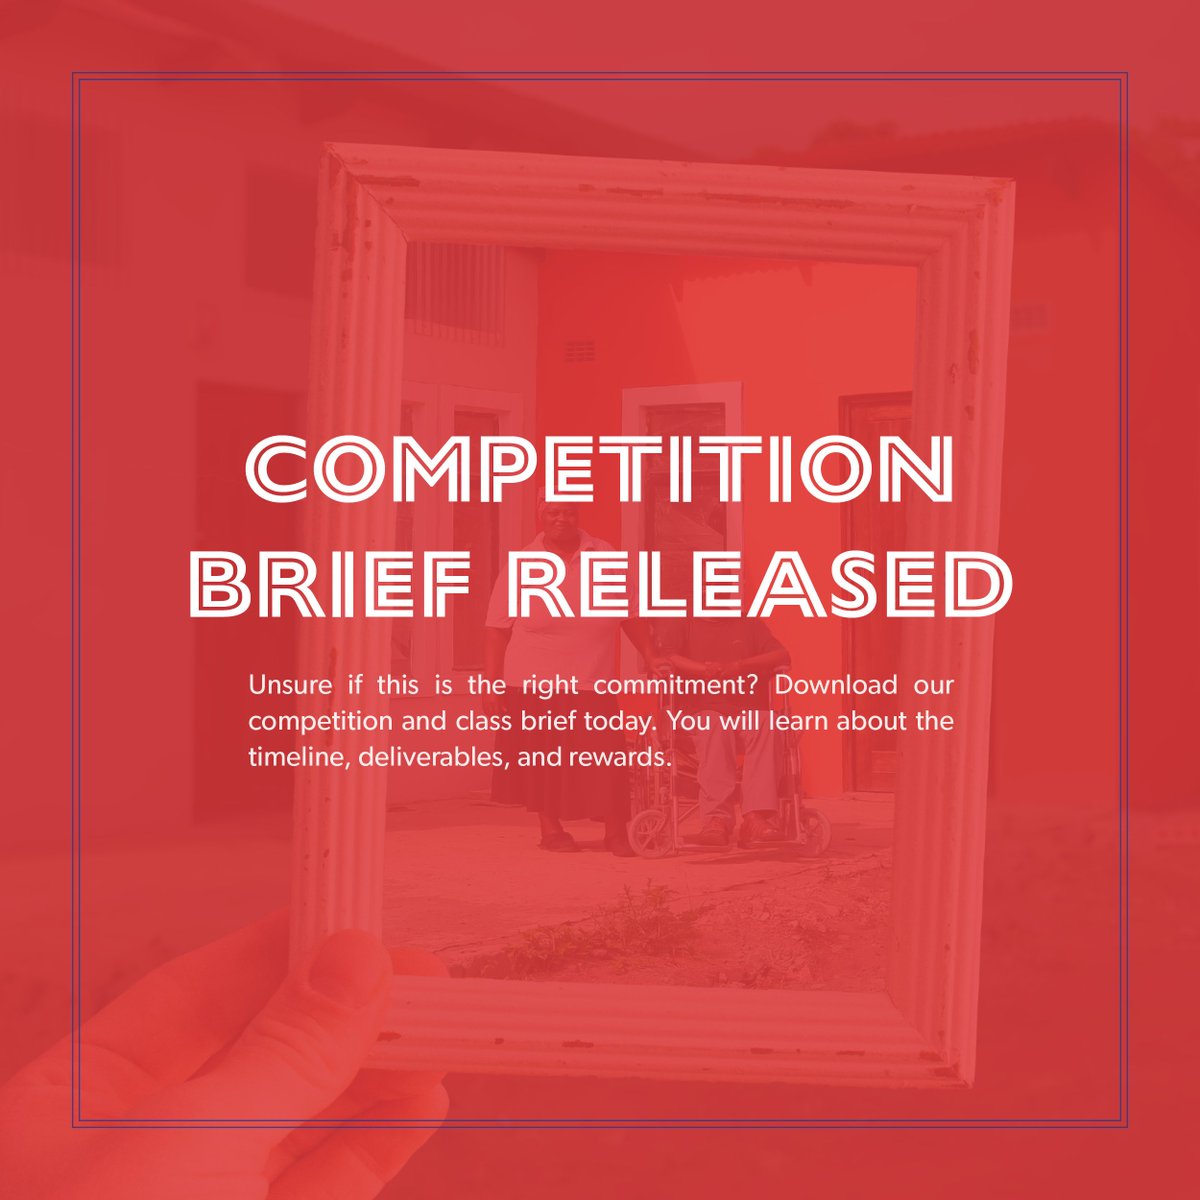 Unsure if this is the right commitment? Download our competition and class brief today. You will learn about the timeline, deliverables, and rewards.
=
#UbuntuASAP #SocialImpact #ArchitectureHeals #StudentProgram #ArchitectureStudent #ArchStudent #ListentoBuild